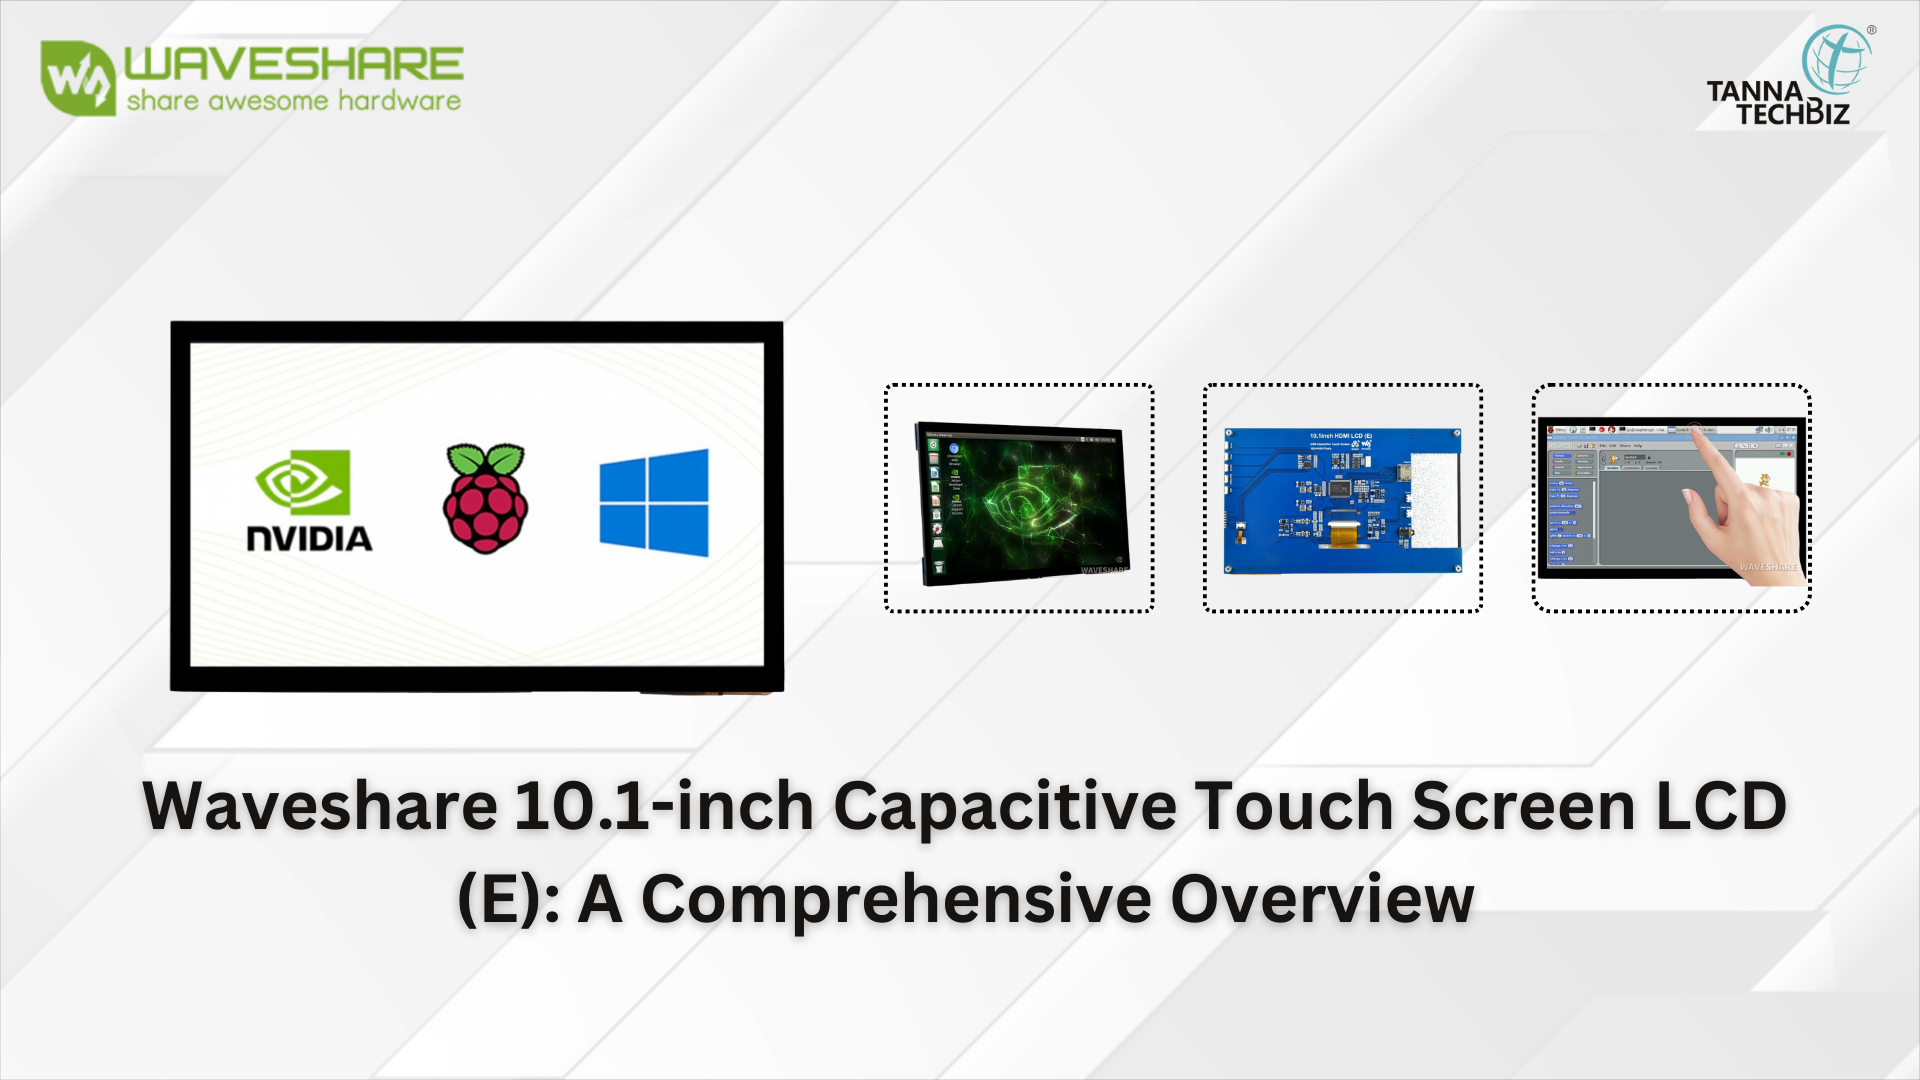 Waveshare 10.1-inch Capacitive Touch Screen LCD (E): A Comprehensive Overview